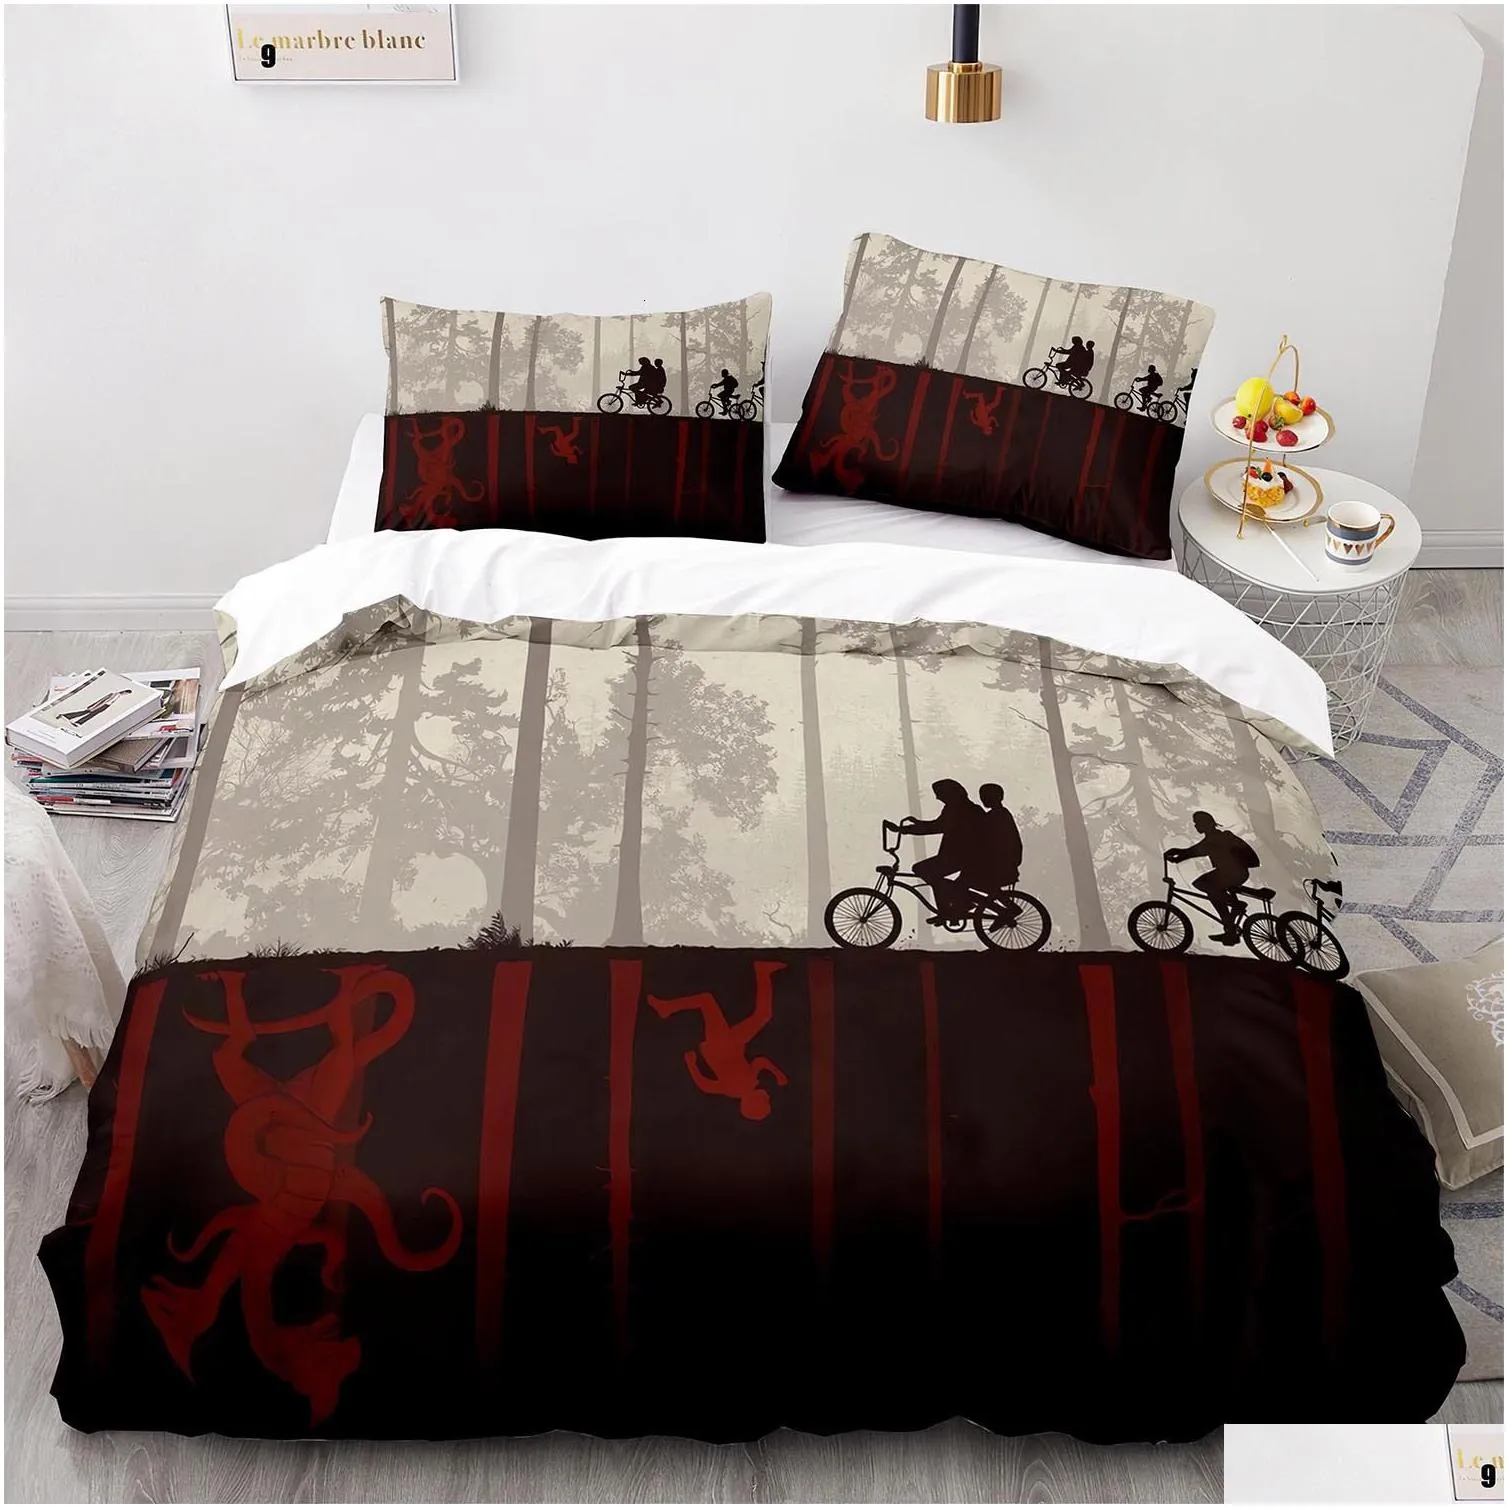 Bedding Sets Stranger Things Set Single Twin Fl Queen King Size Bed Aldt Kid Bedroom 011 230211 Drop Delivery Dhtmc